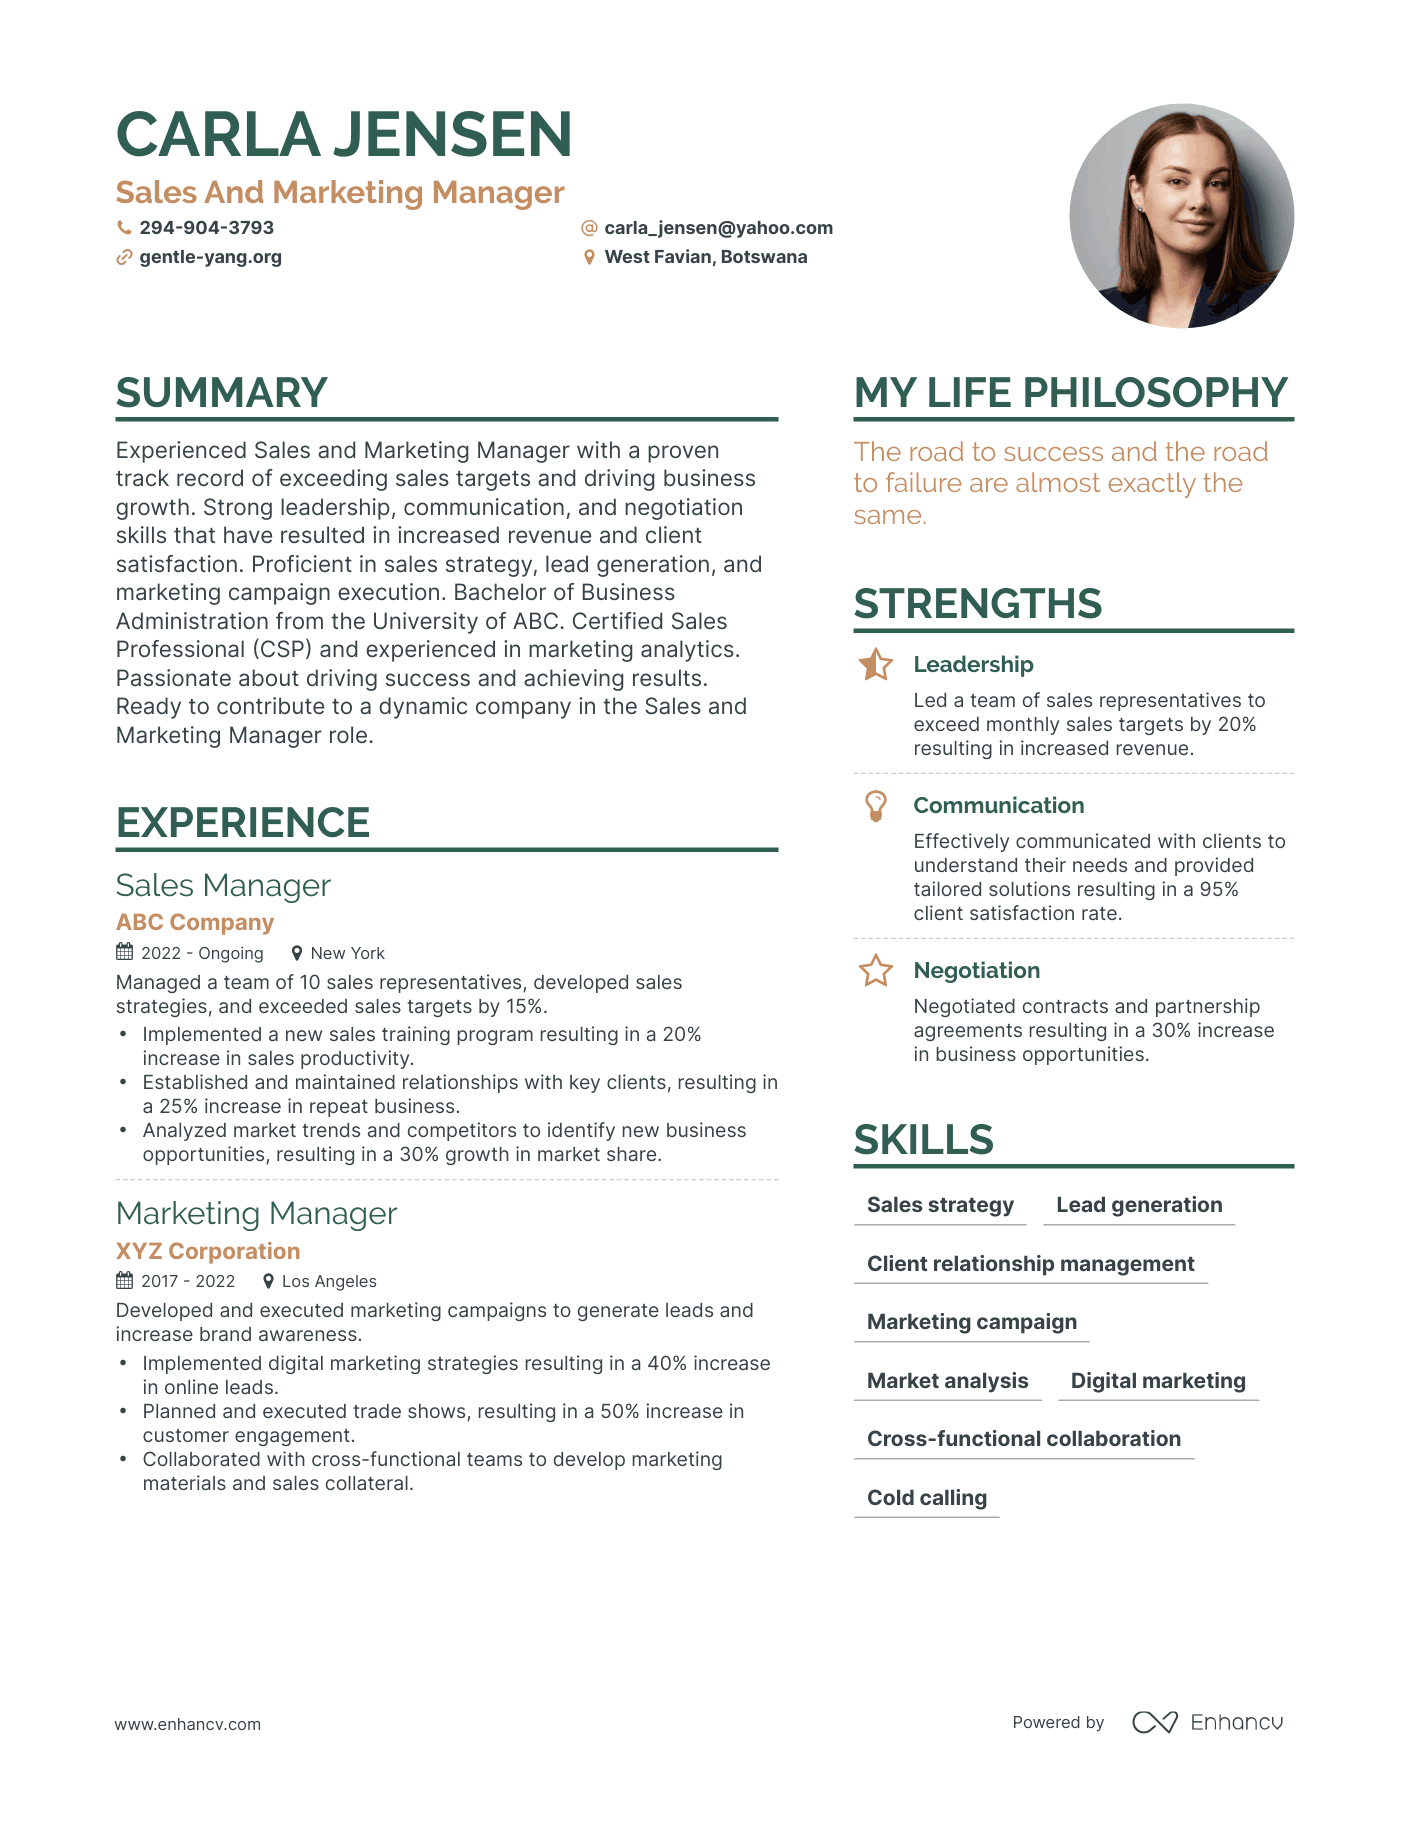 Sales And Marketing Manager resume example